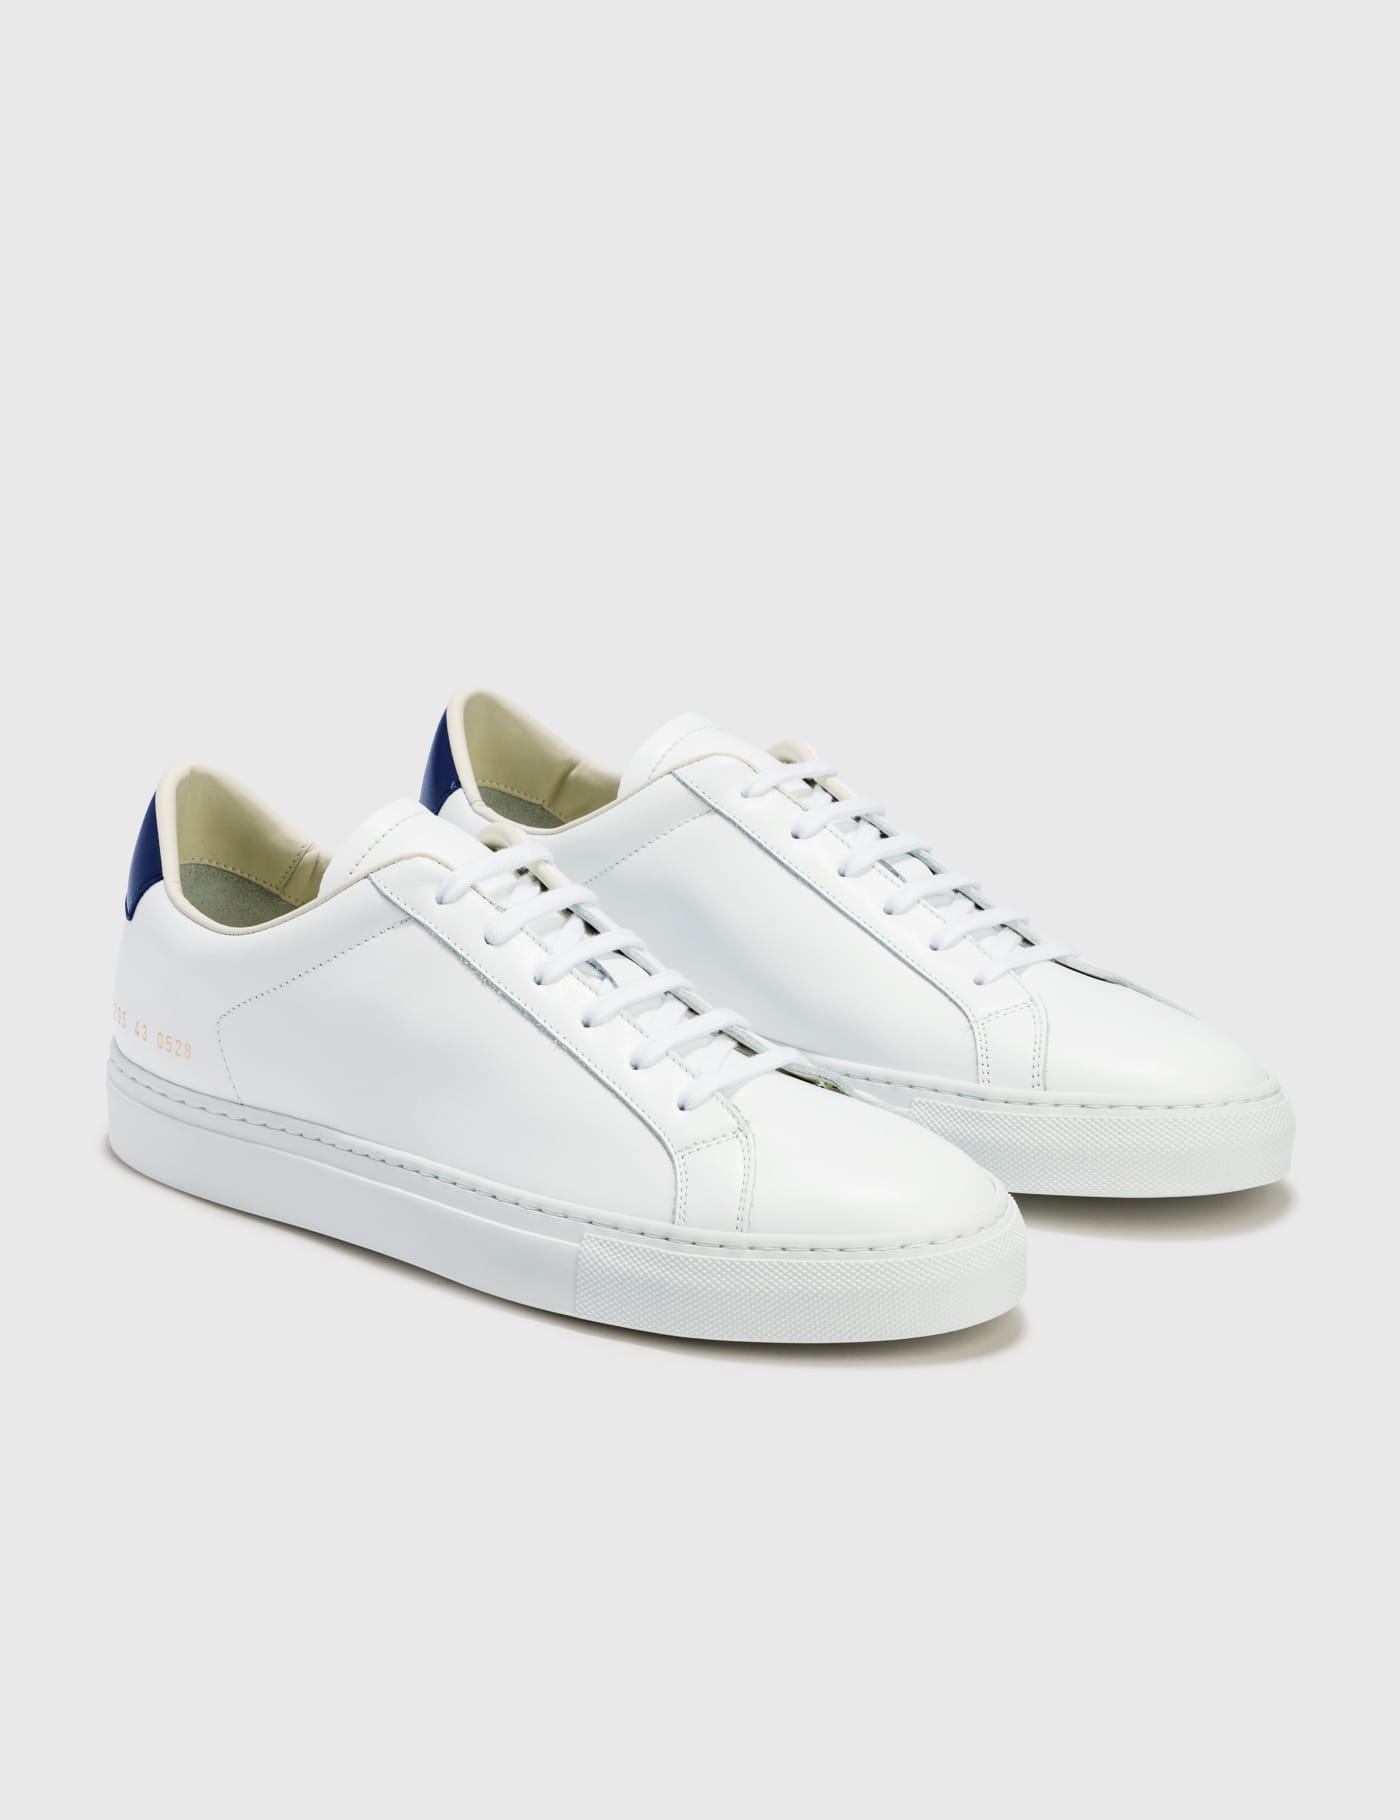 Common Projects - Retro Low Sneakers | HBX - Globally Curated 